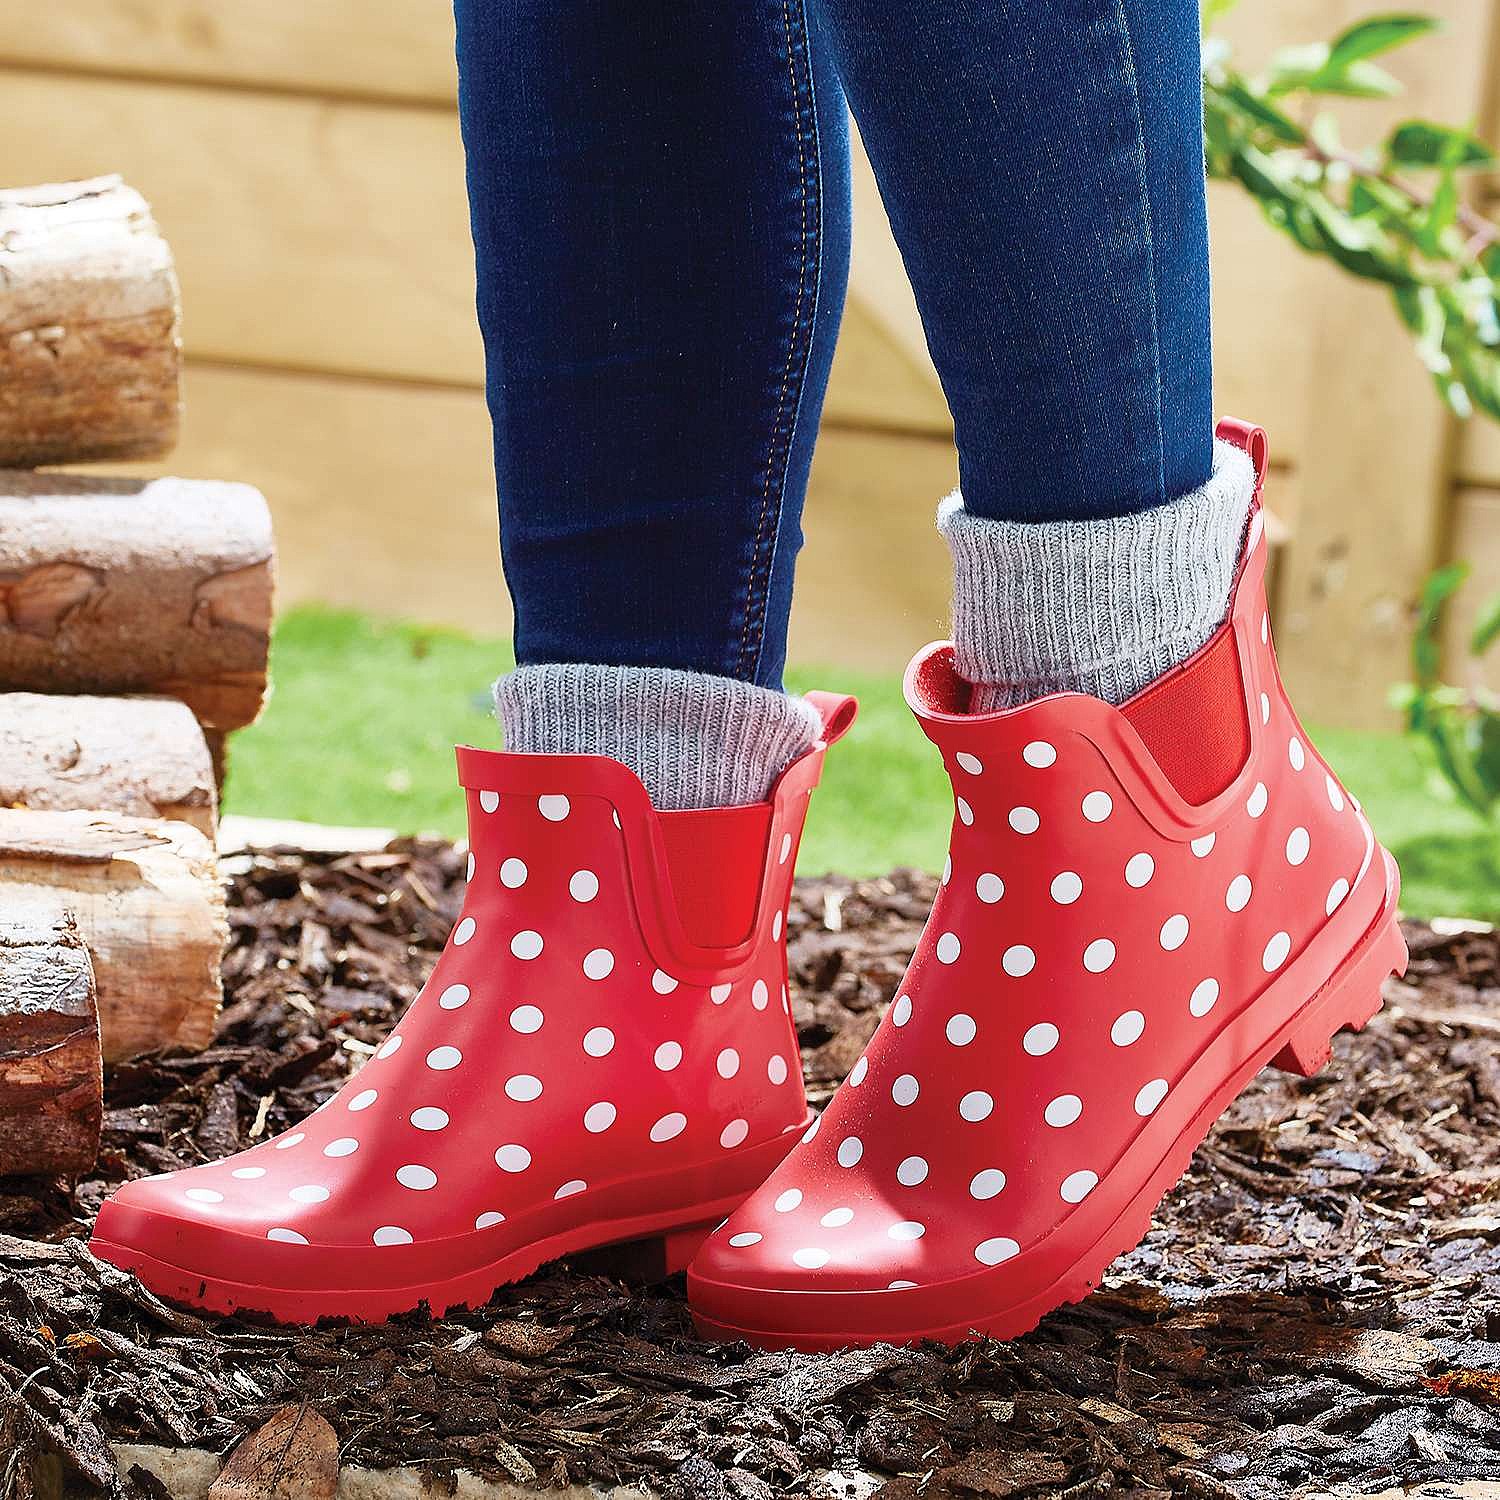 Red Polka Dot Ankle Wellie Boots| Coopers of Stortford